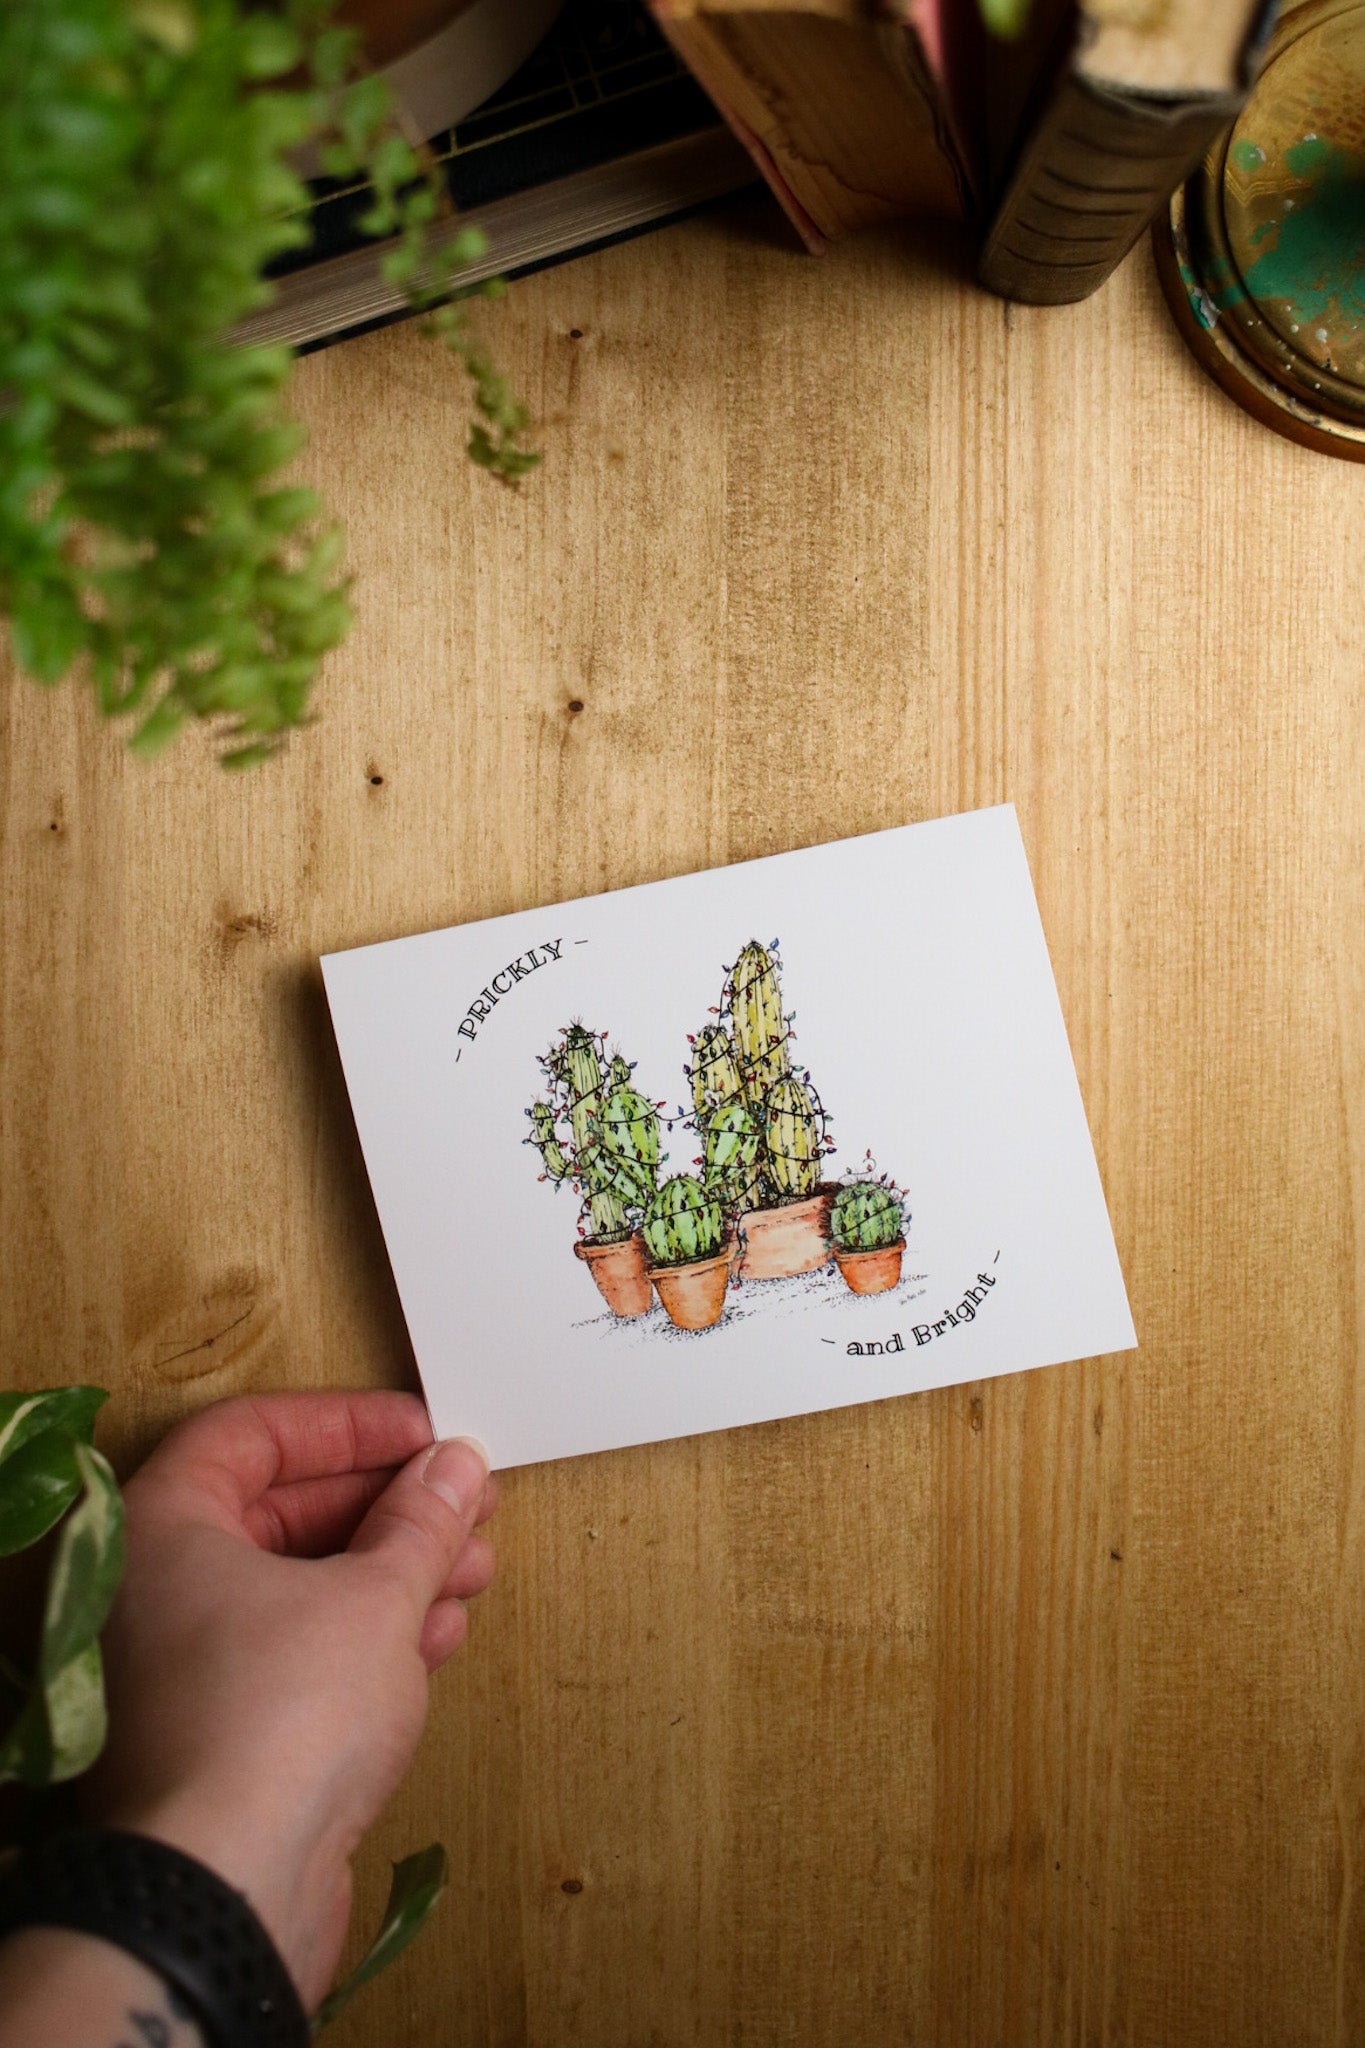 SECONDS - Prickly and Bright Cactus Group (Small Card)